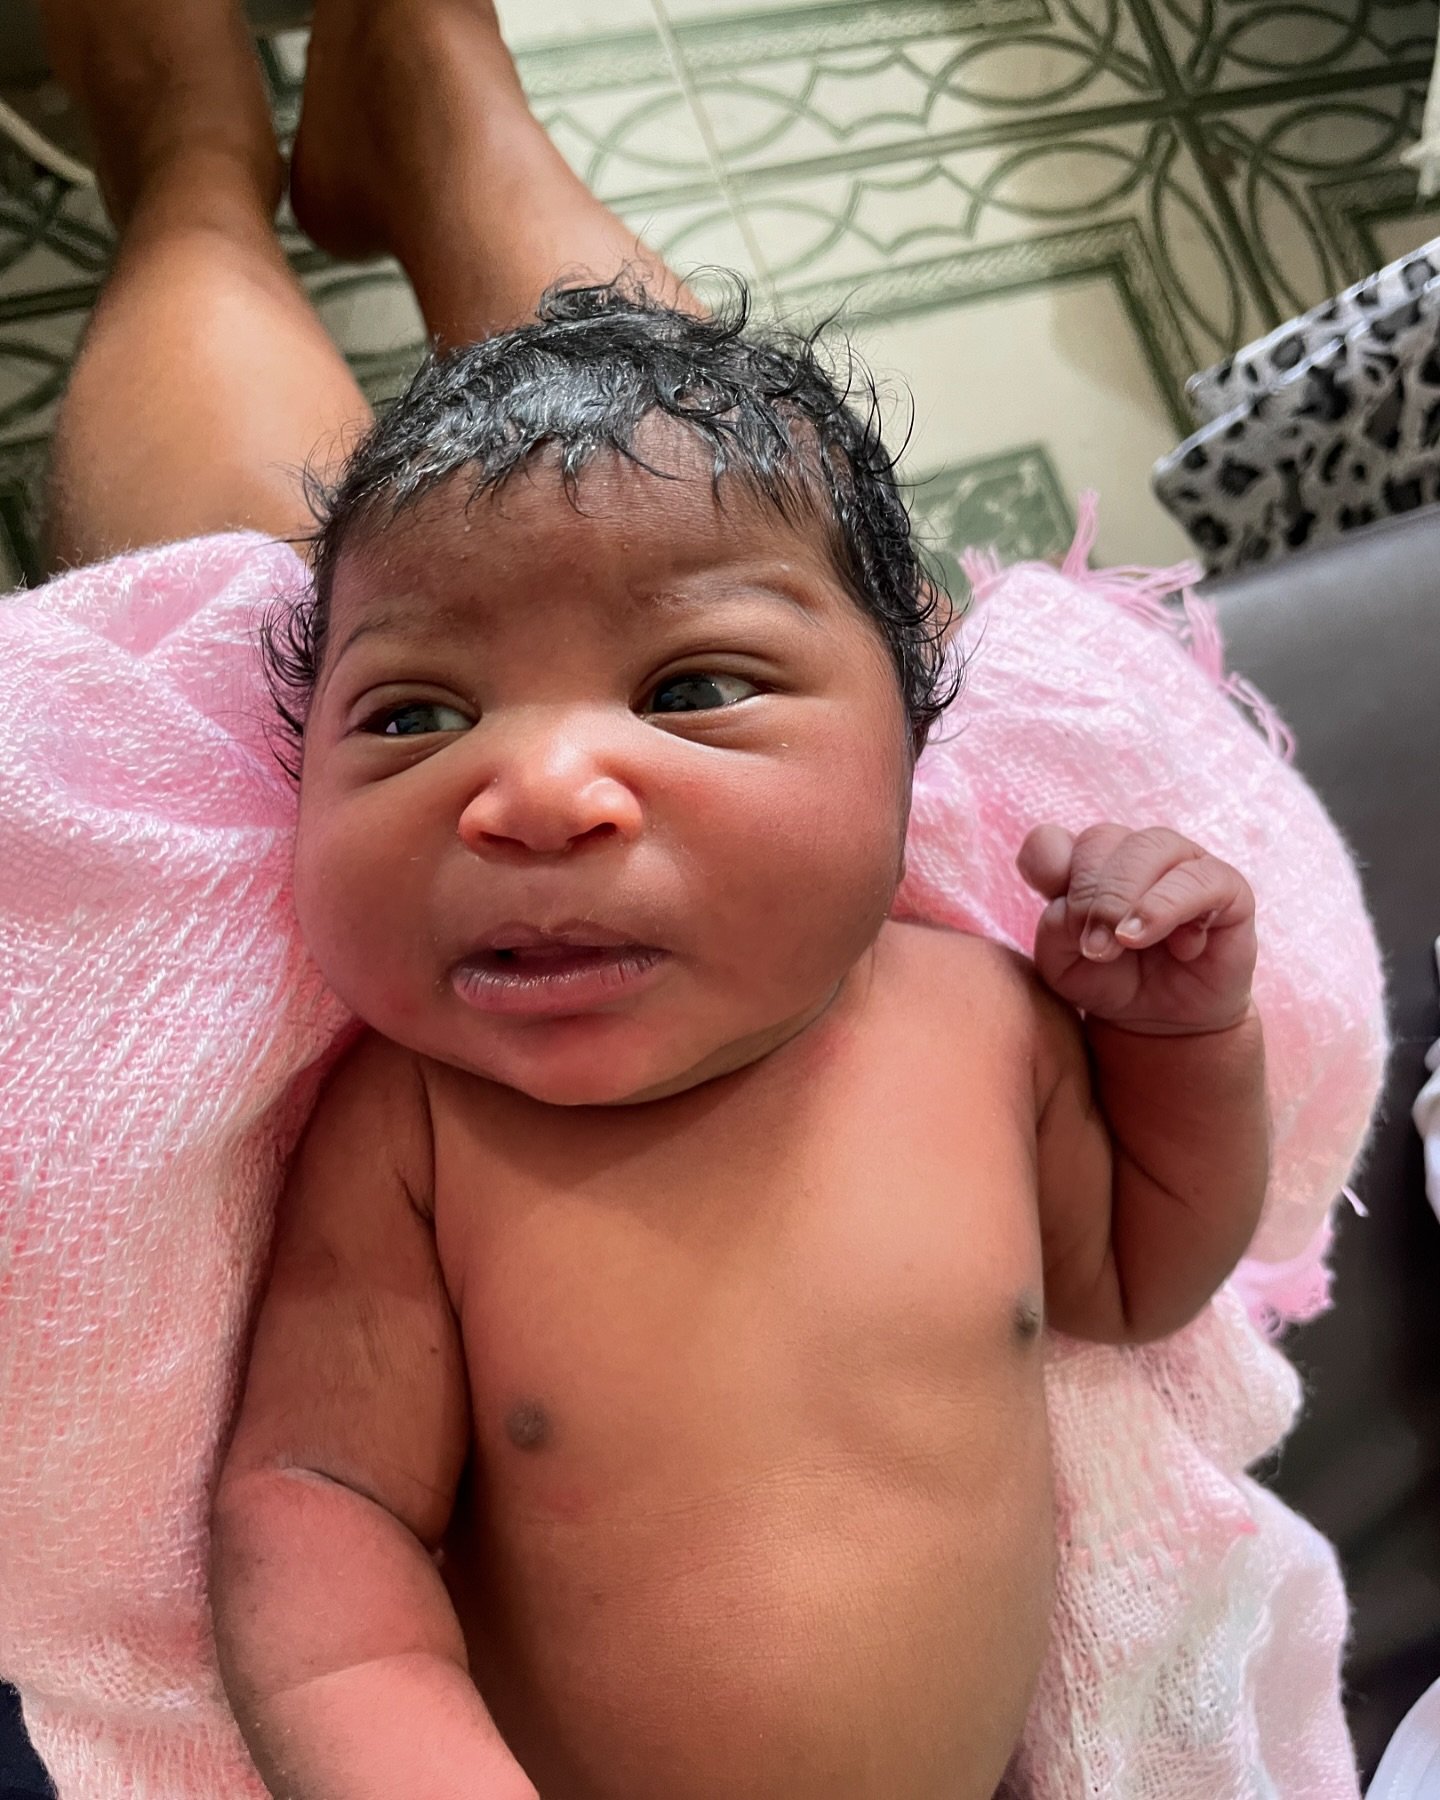 What a little angel!👼🏾💗

We firmly believe that mothers in Haiti should have access to maternal health care, including delivery services supervised by medical professionals. In addition to our two maternity centers, we also provide clean birthing 